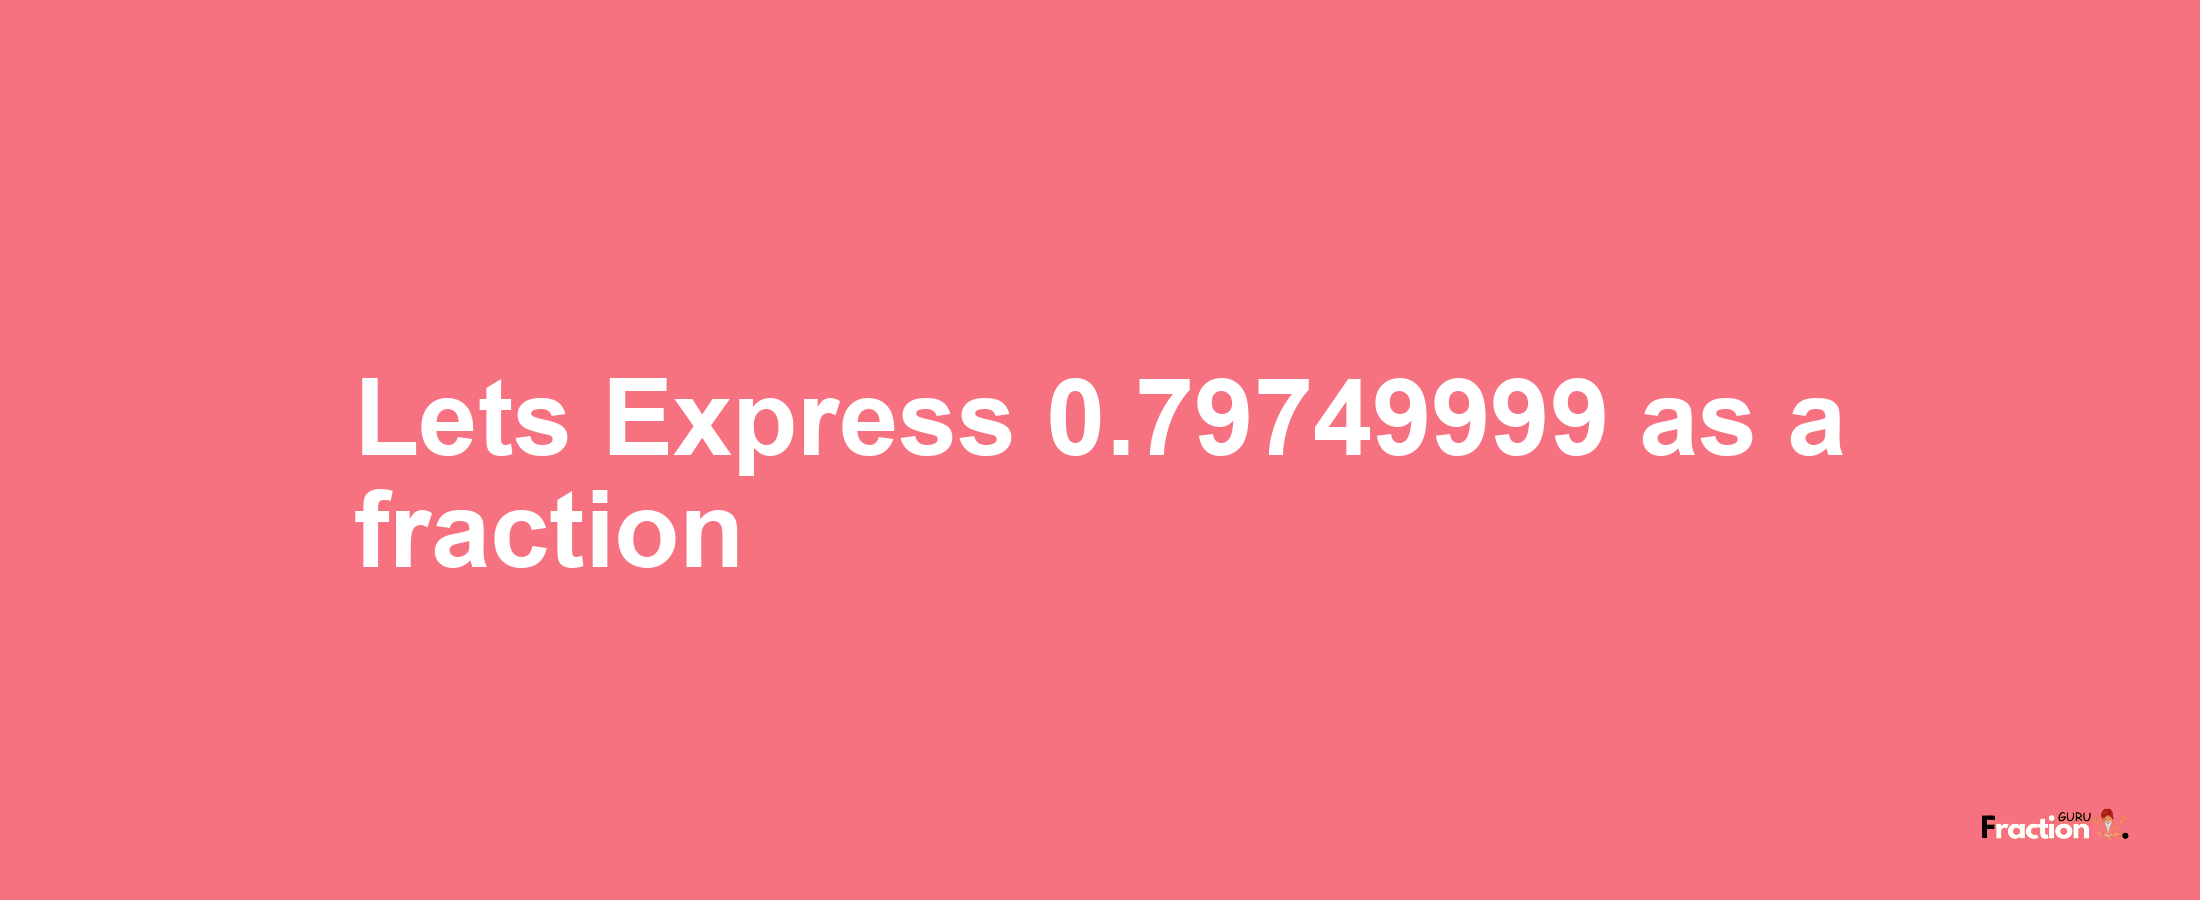 Lets Express 0.79749999 as afraction